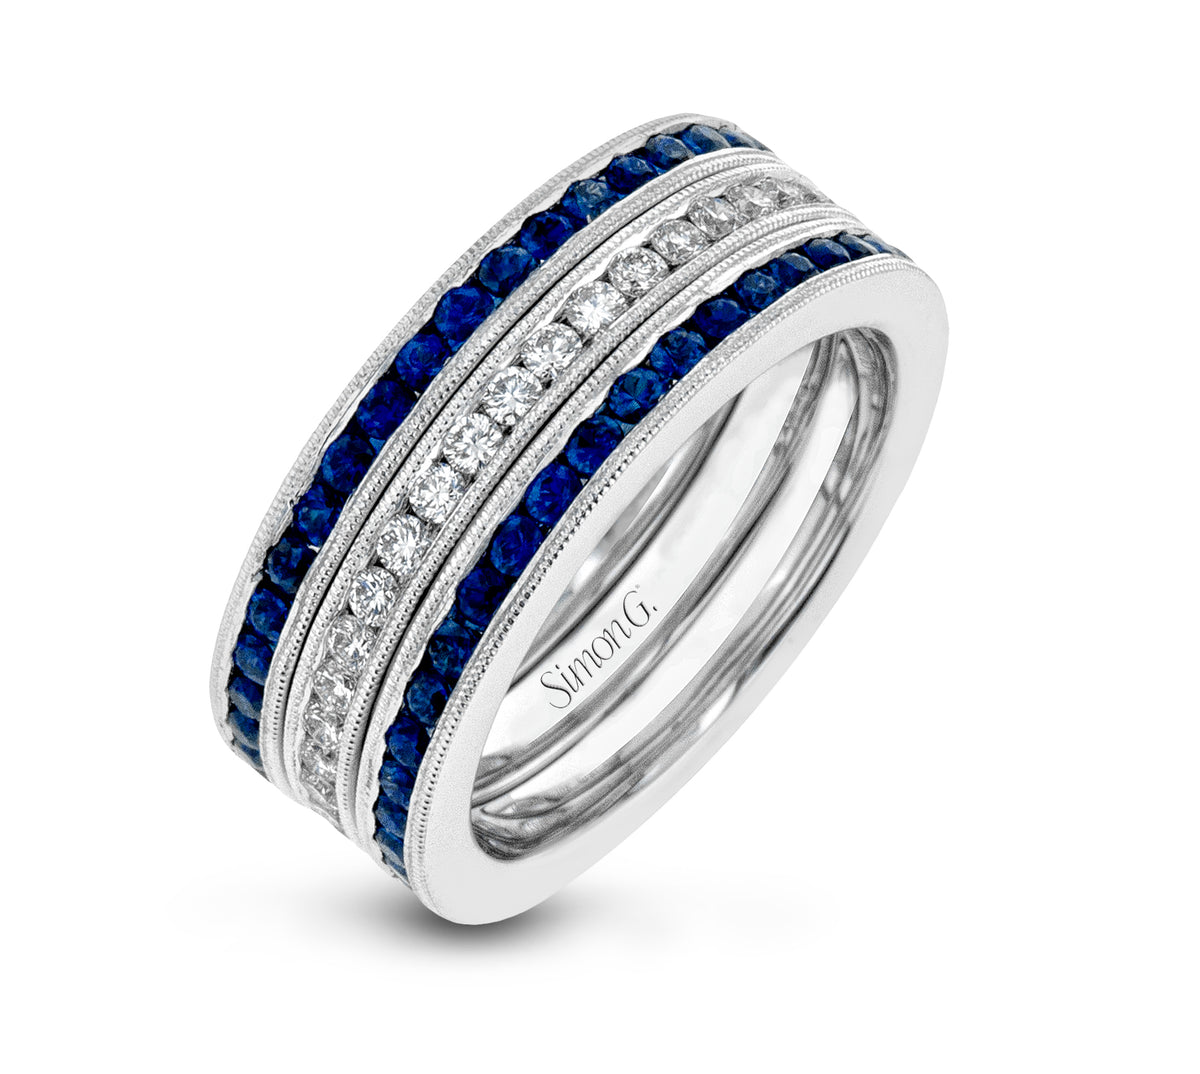 Simon G 18K White Gold Stackable Sapphire and Diamond Eternity Bands